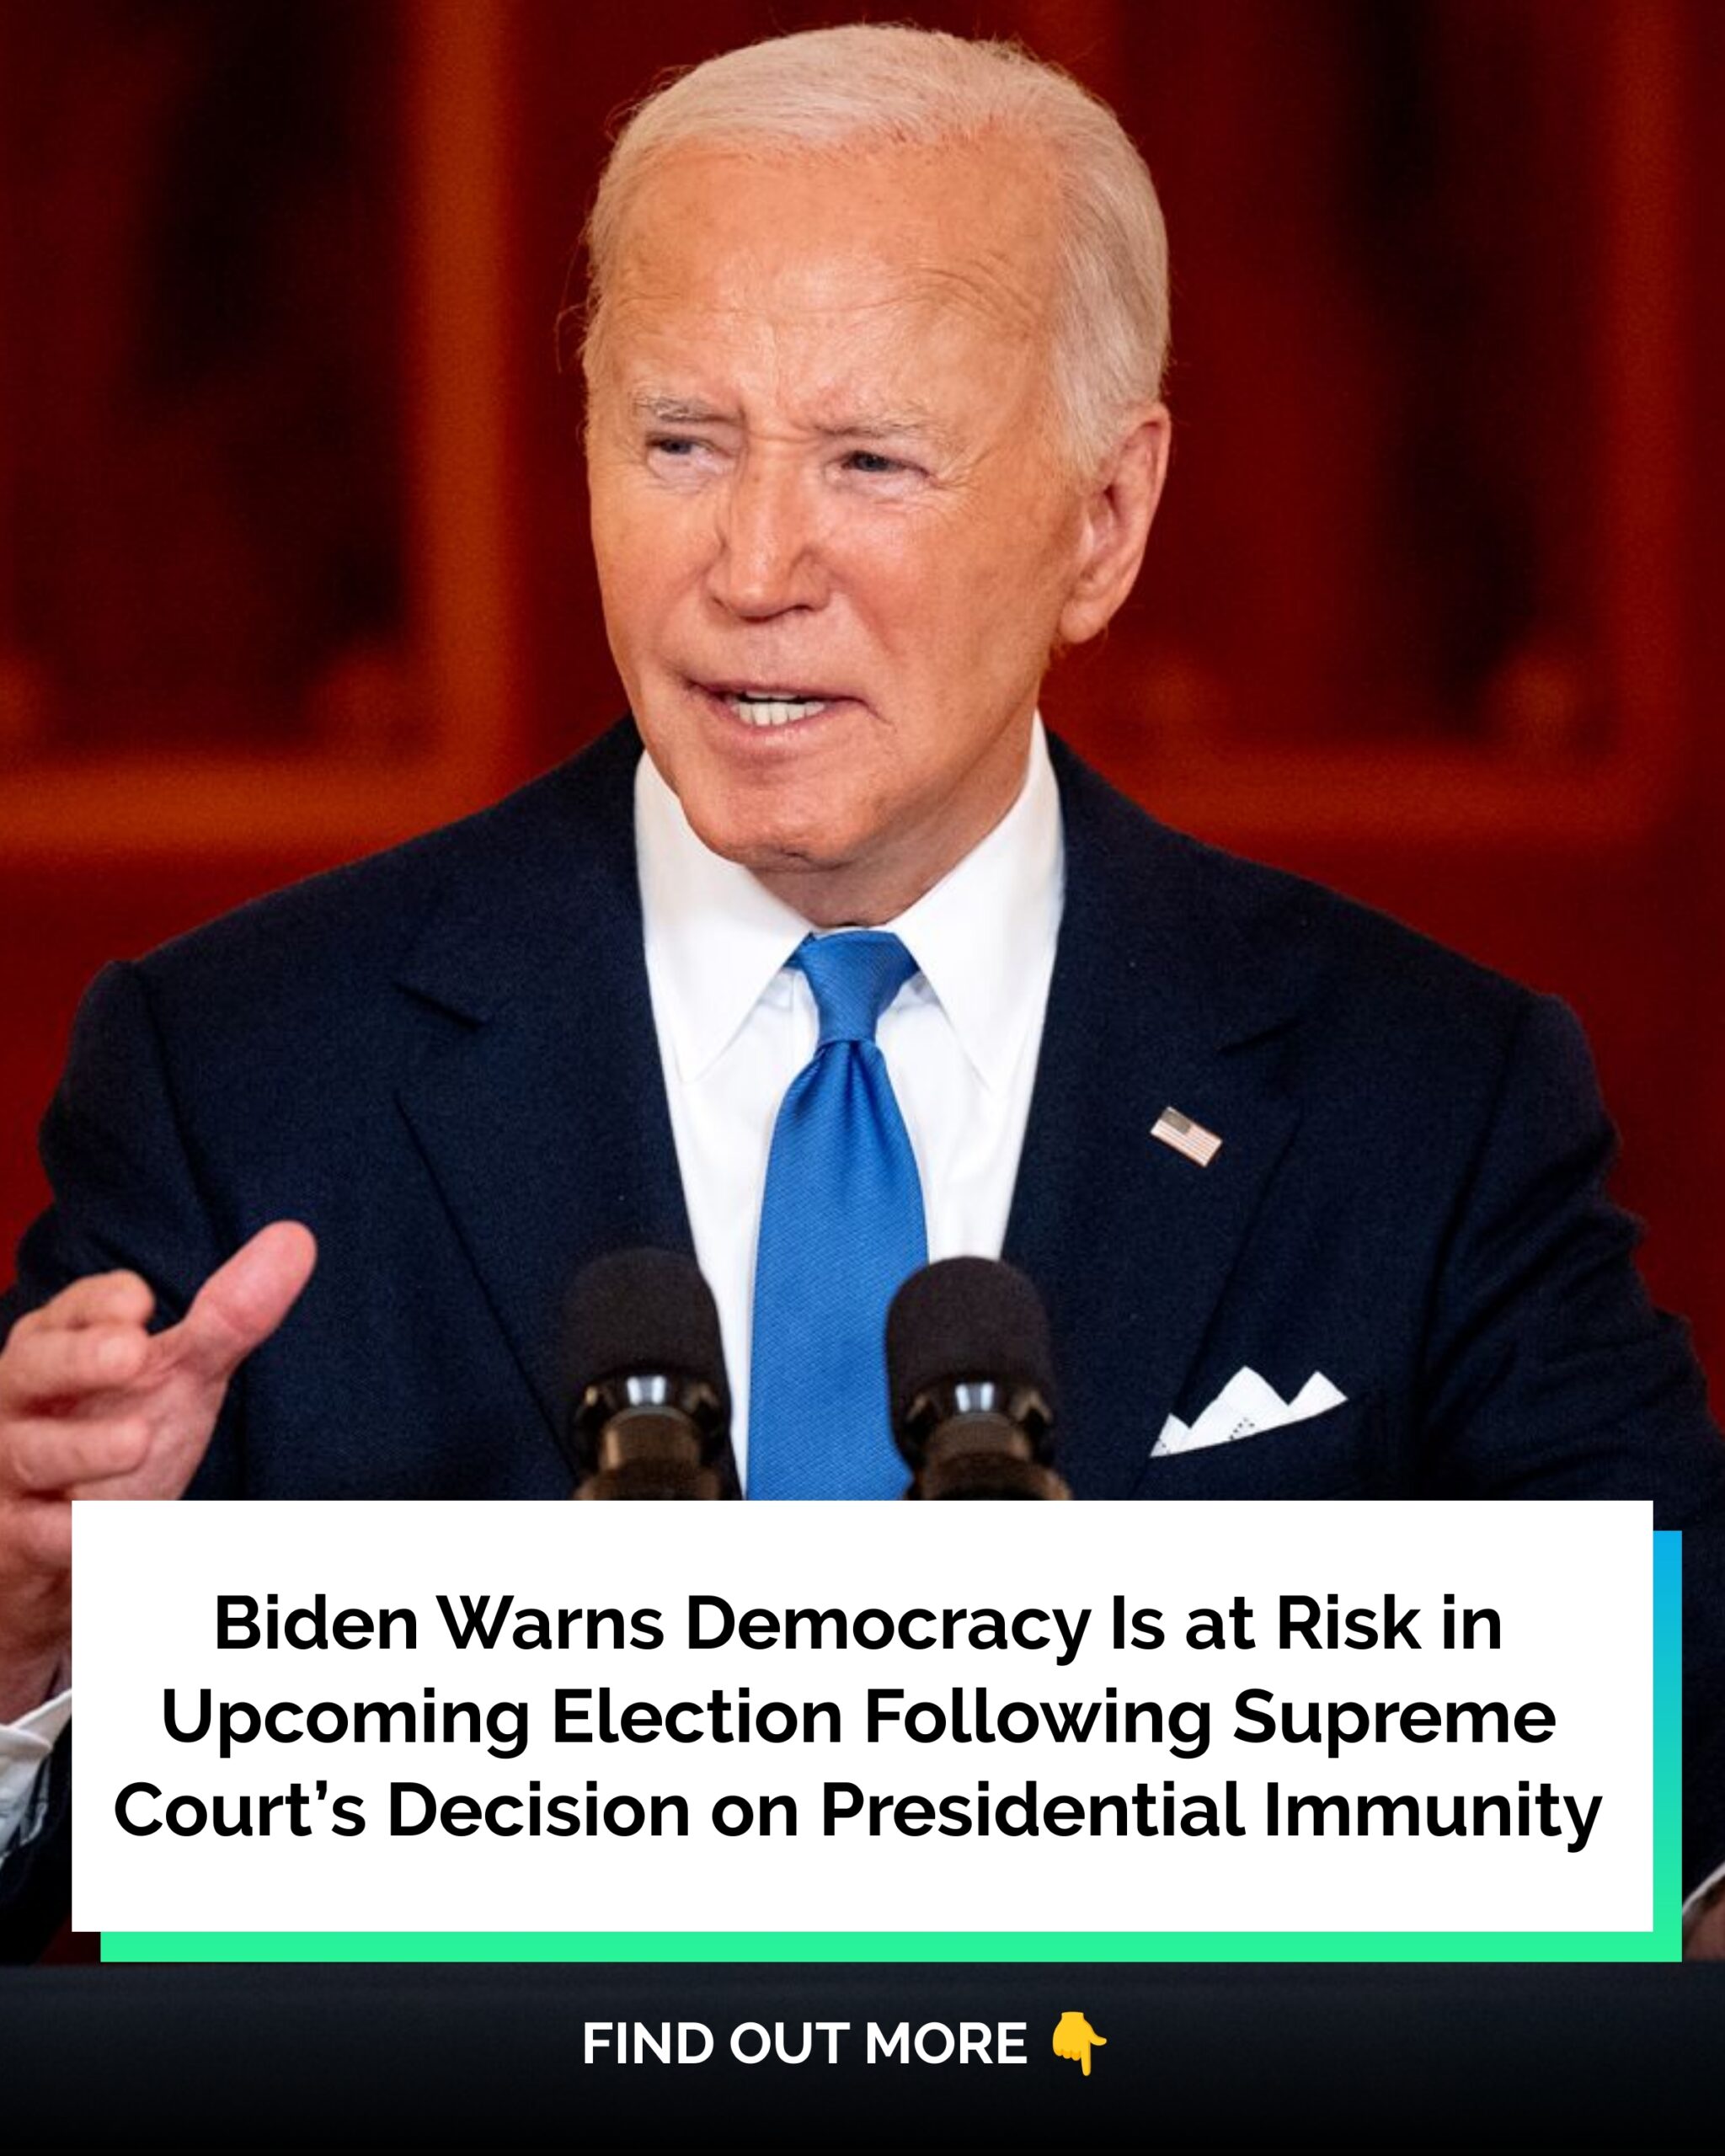 Biden Says Democracy Is at Risk in This Election After Supreme Court’s Decision on Presidential Immunity